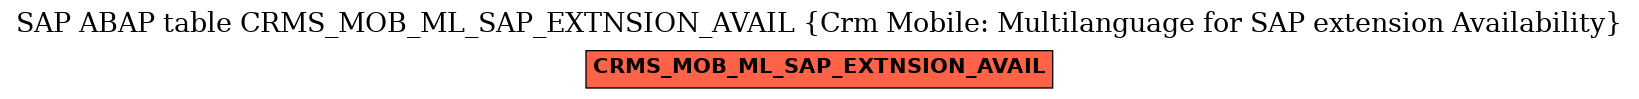 E-R Diagram for table CRMS_MOB_ML_SAP_EXTNSION_AVAIL (Crm Mobile: Multilanguage for SAP extension Availability)